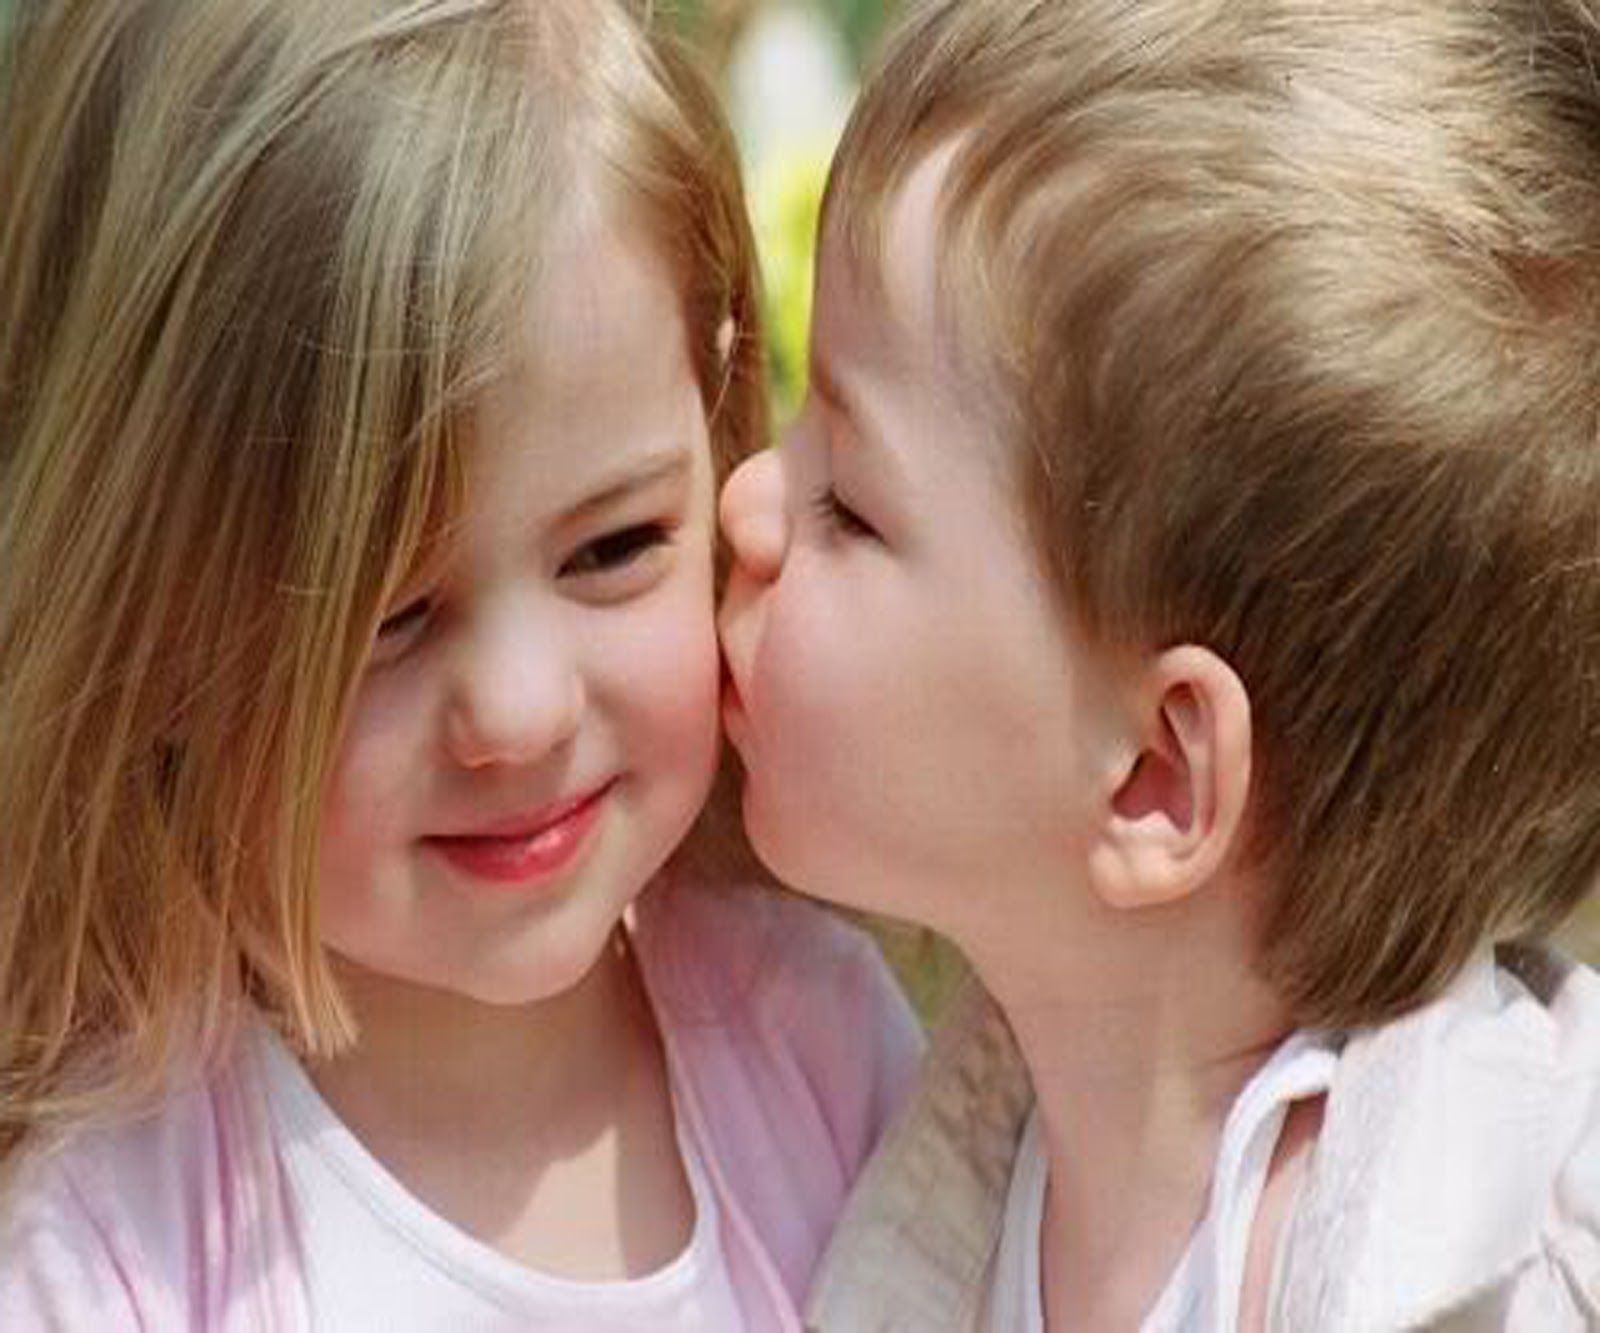 Best image about Baby kisses. Baby kiss, New. Kids kiss, Baby kiss, Cute kiss